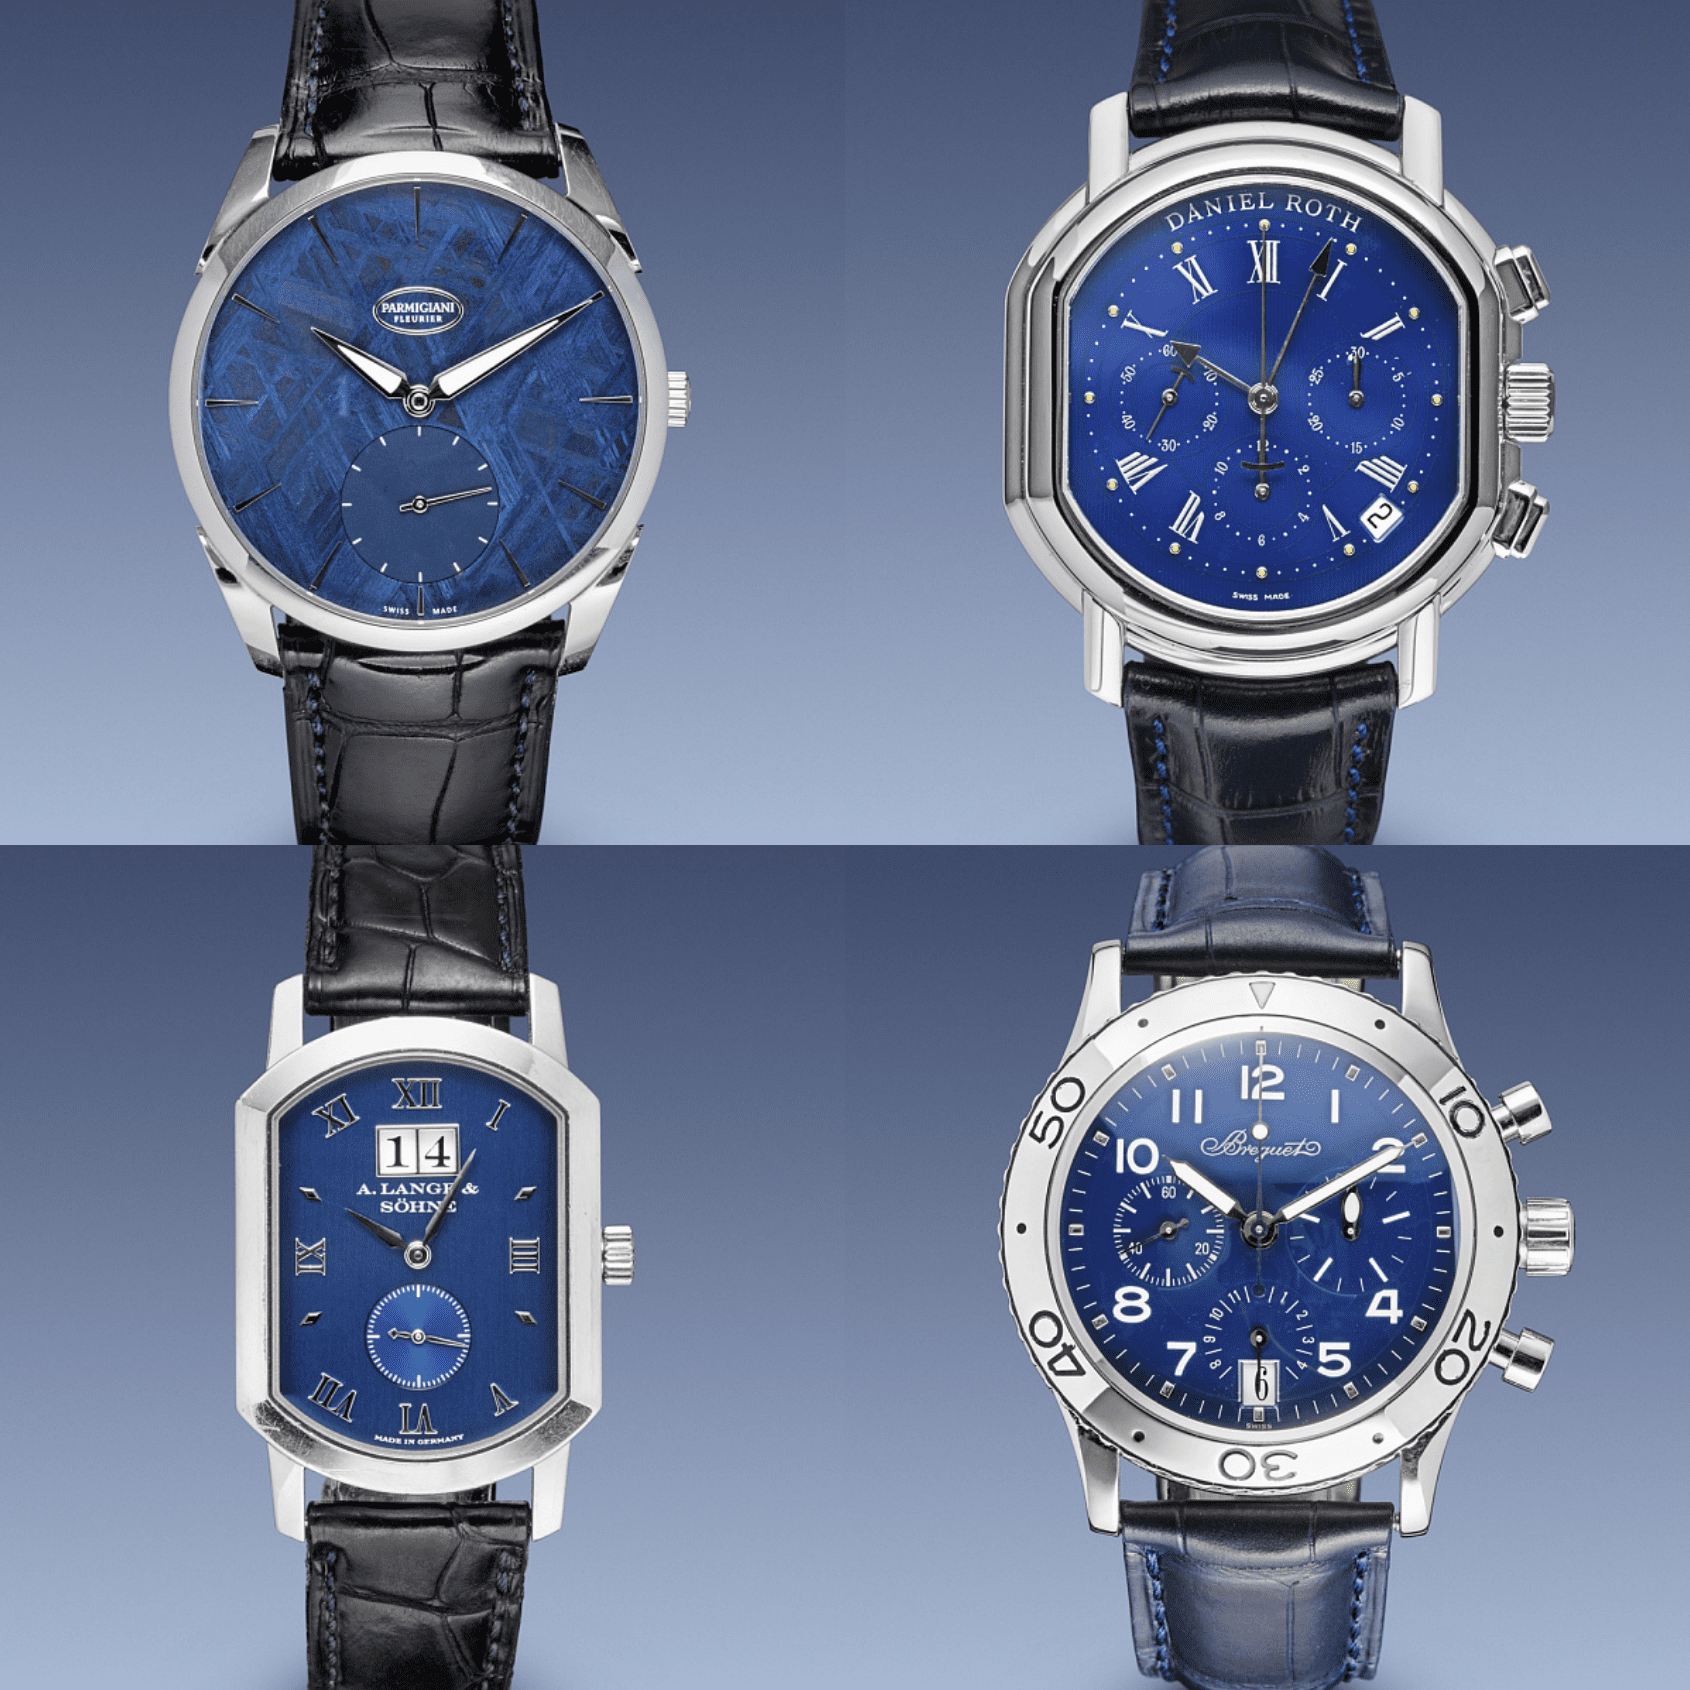 Five sleeper picks from the upcoming “Precious Blues” Ineichen auction